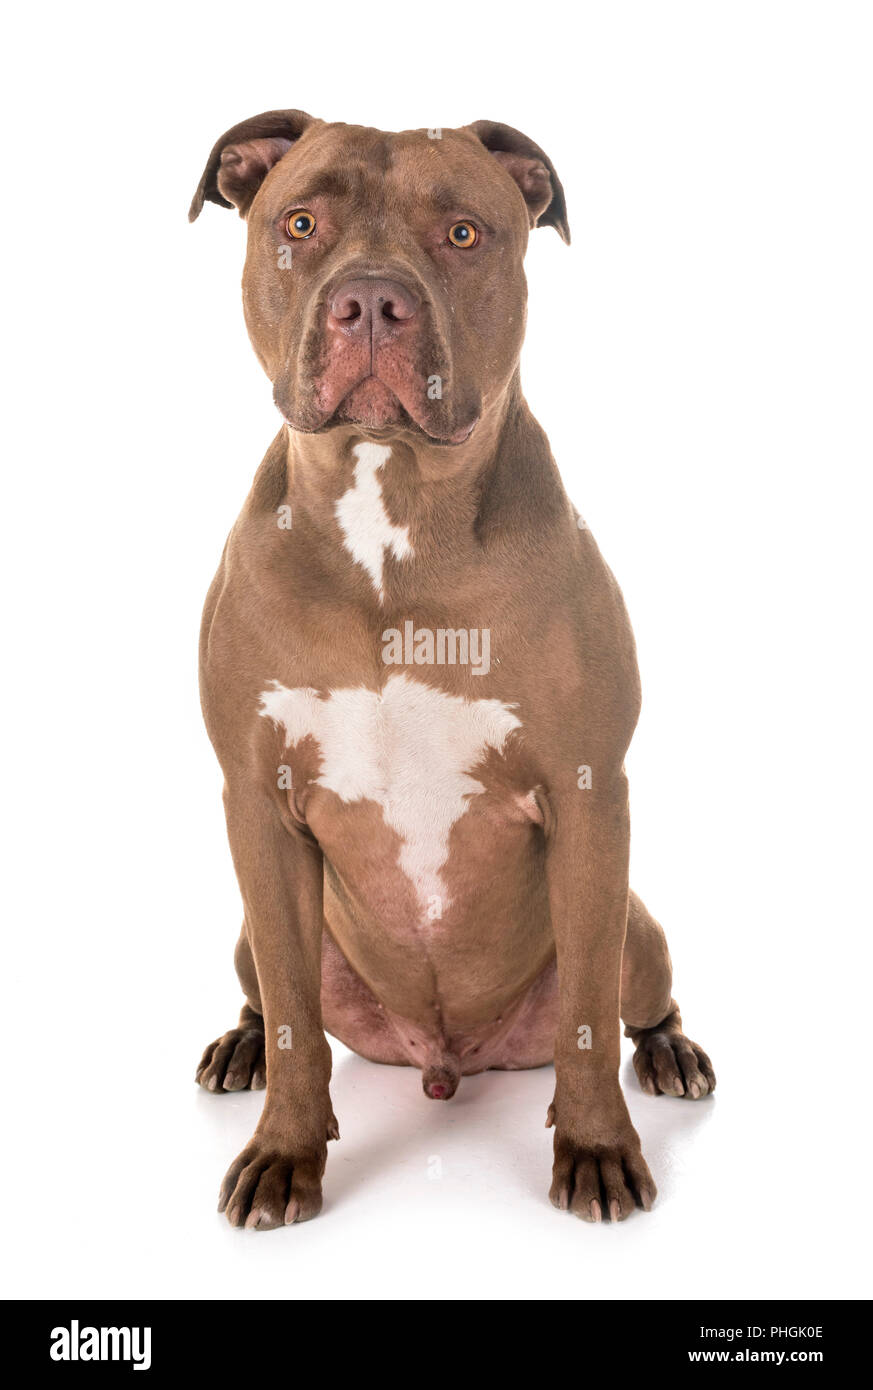 Pitbull red nose in front of white background Banque D'Images